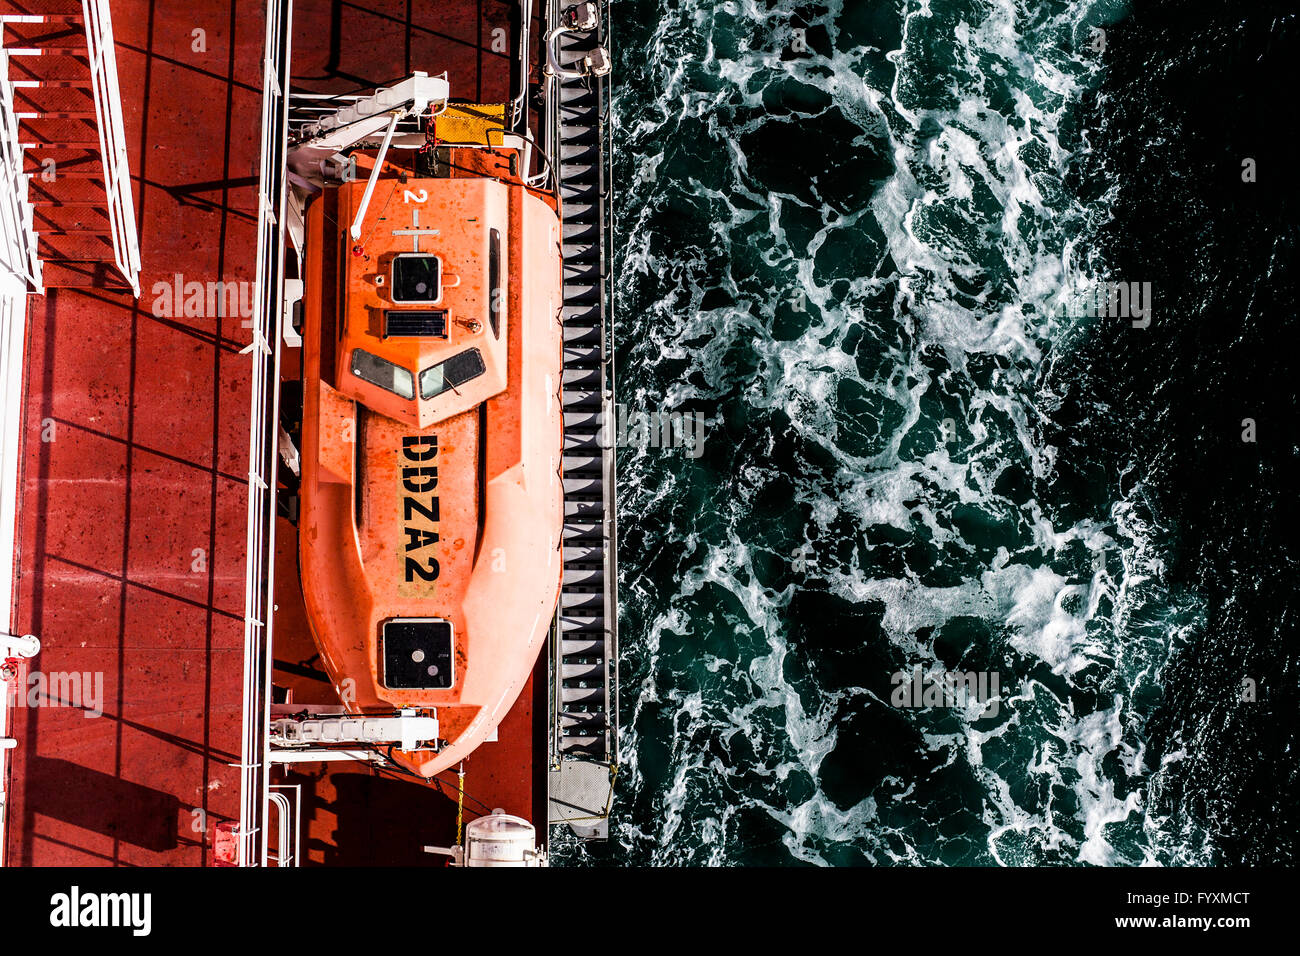 Life boat viewed from above on board a container ship in the Suez Canal. Stock Photo